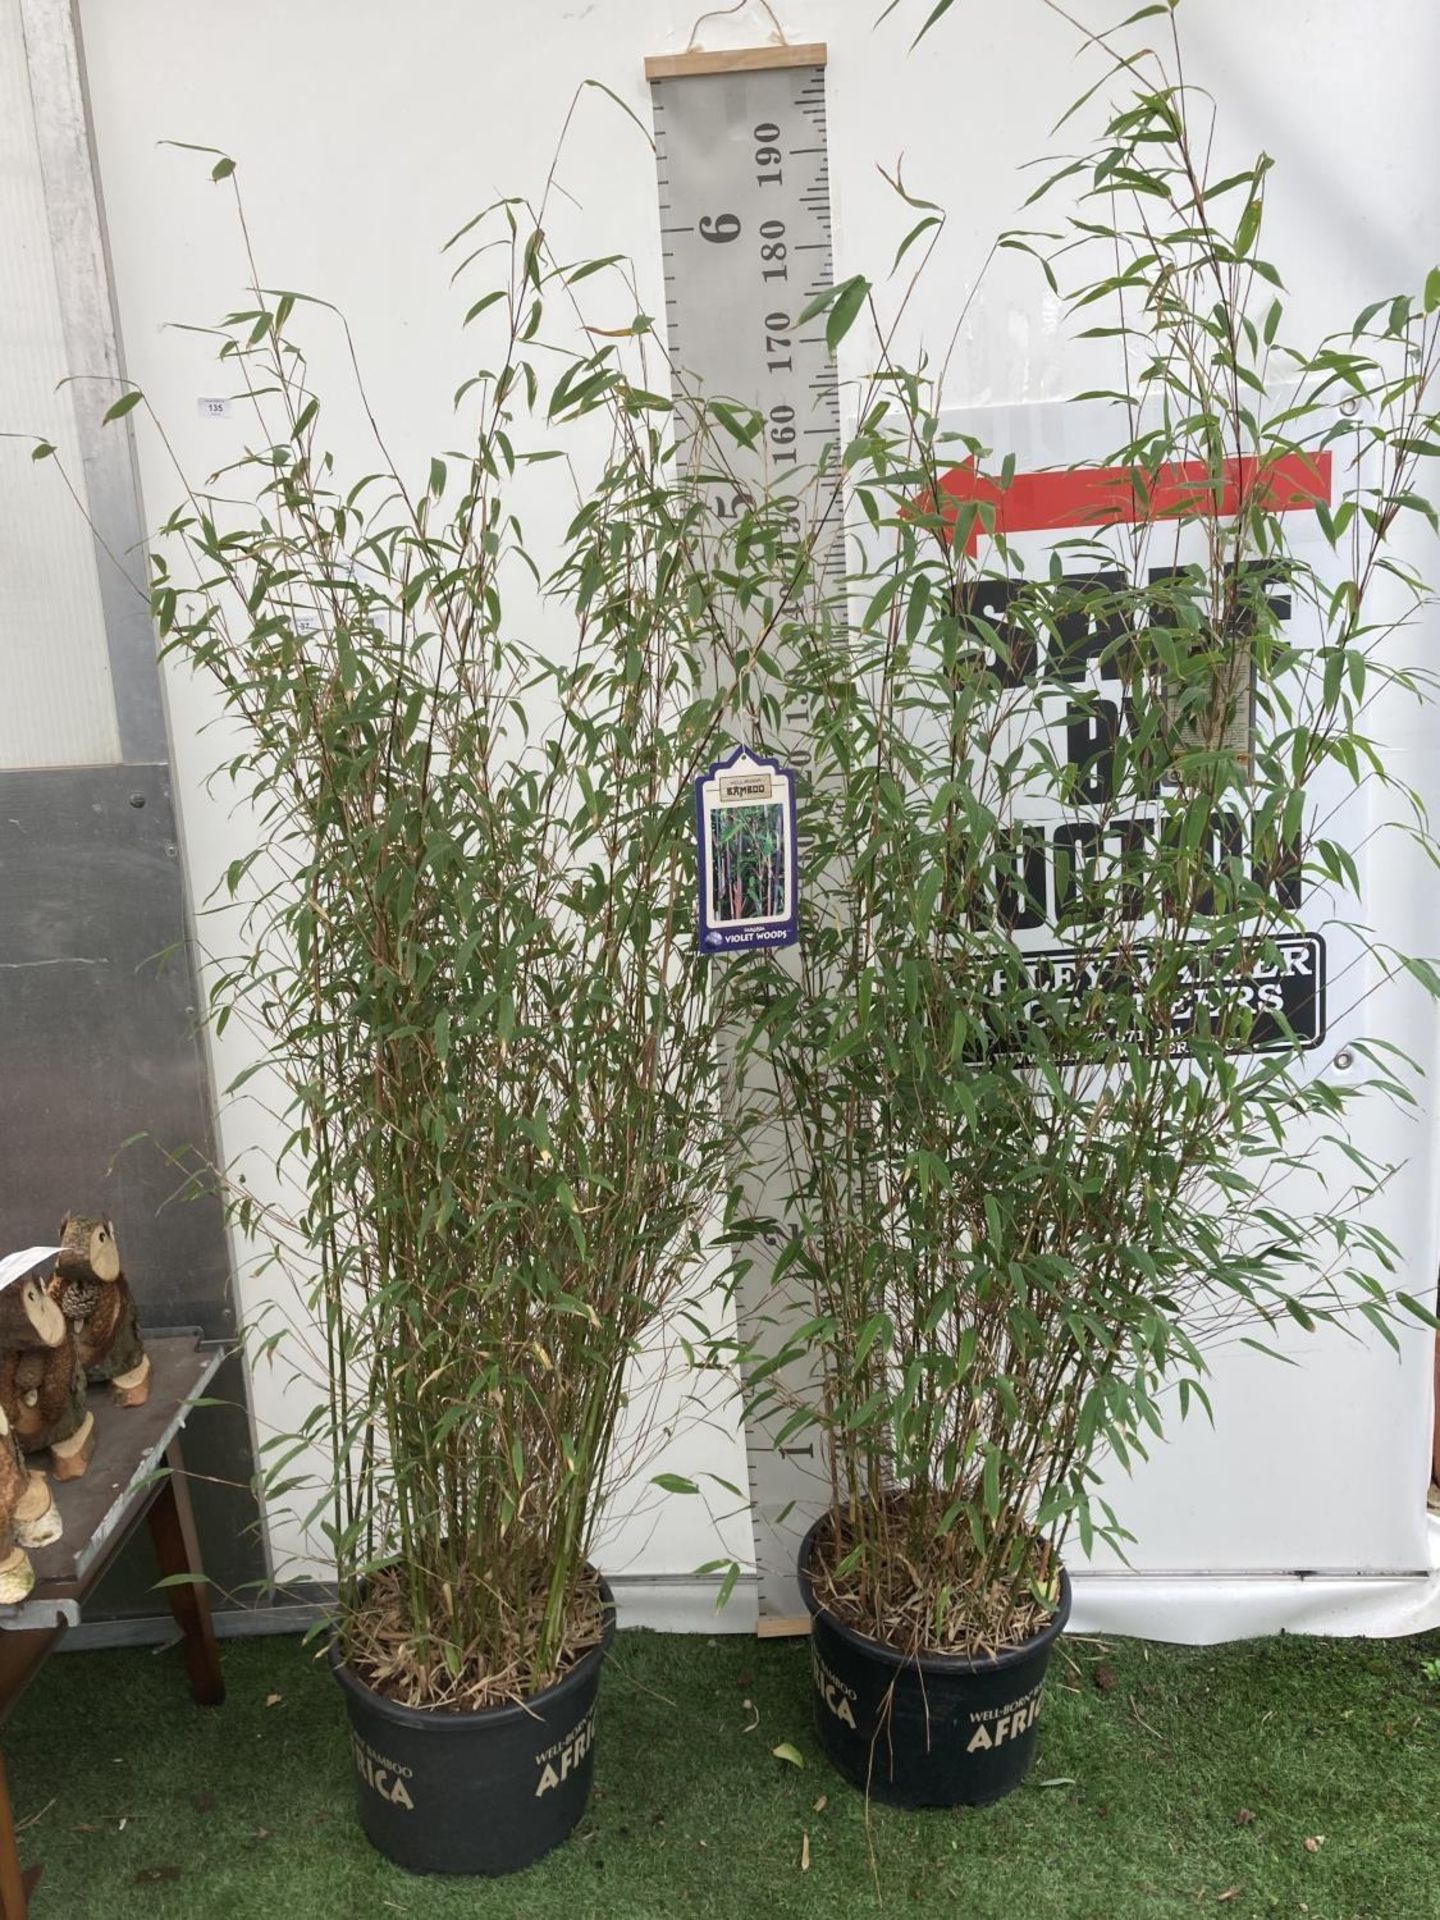 TWO LARGE BAMBOO FARGESIA 'VIOLET WOODS' APPROX 180CM IN HEIGHT IN 10 LTR POTS PLUS VAT TO BE SOLD - Image 2 of 6